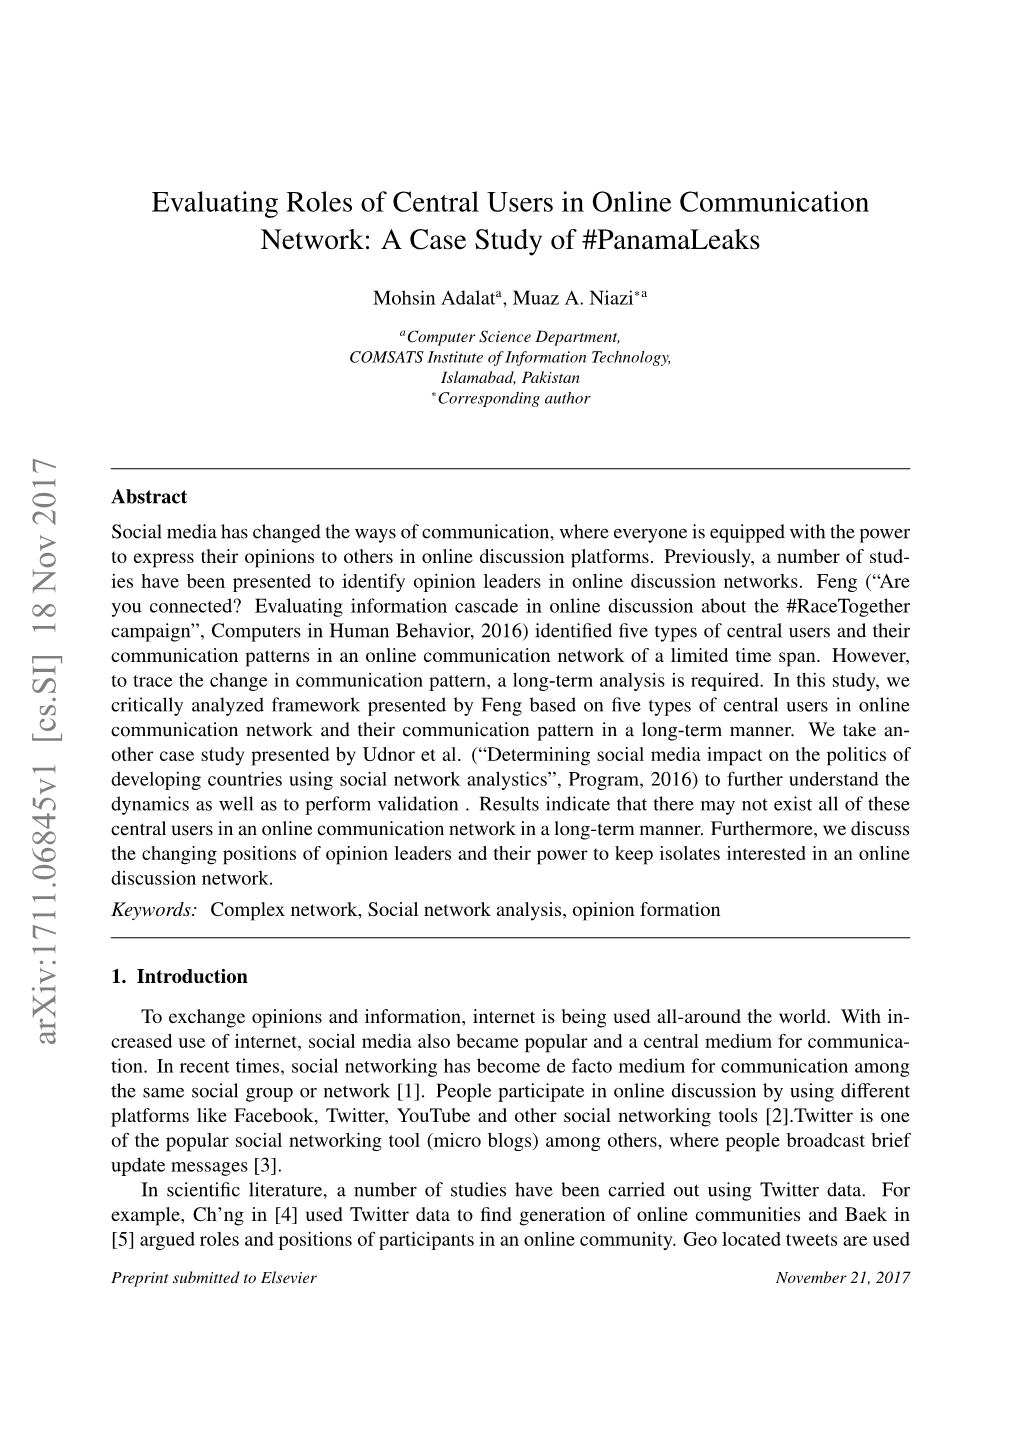 Evaluating Roles of Central Users in Online Communication Networks: A